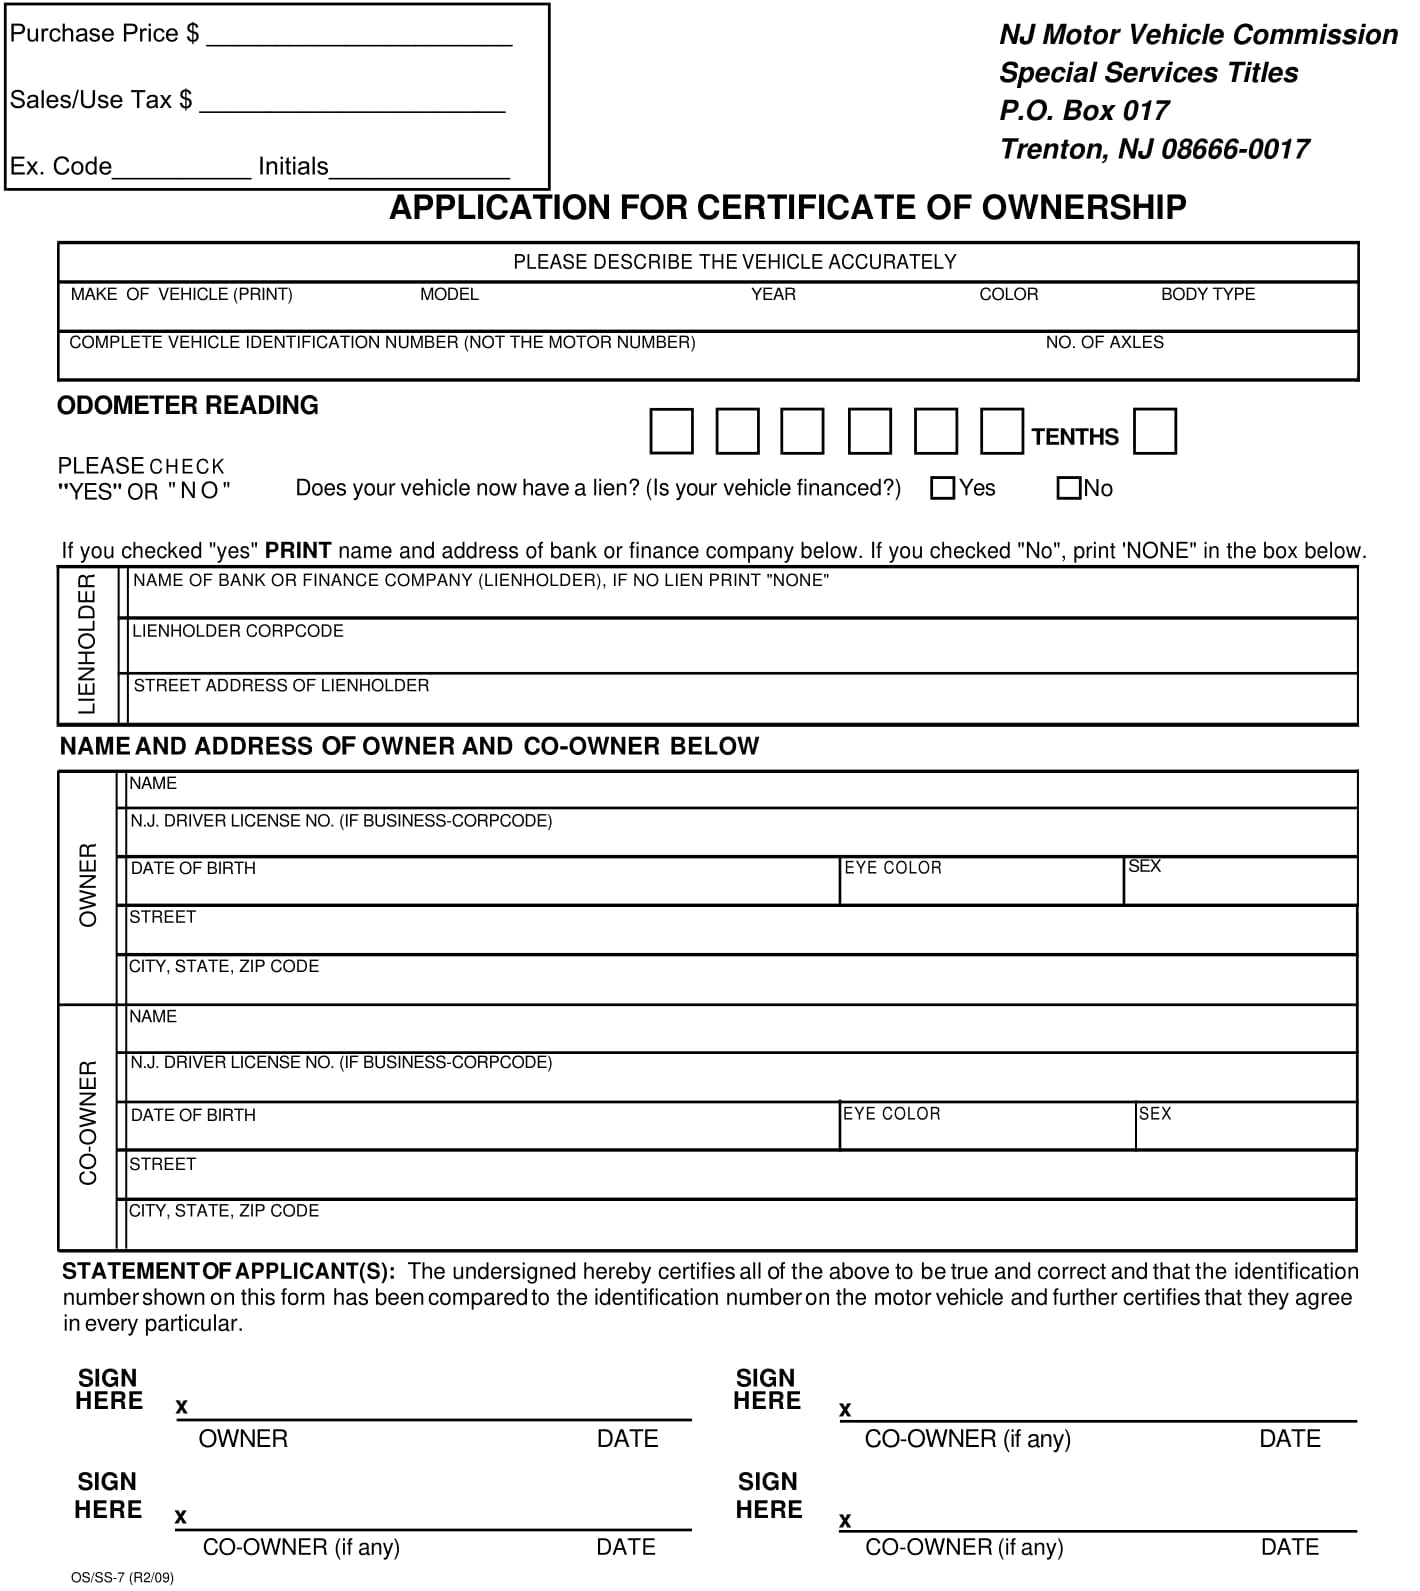 legal vehicle ownership certificate application form 1